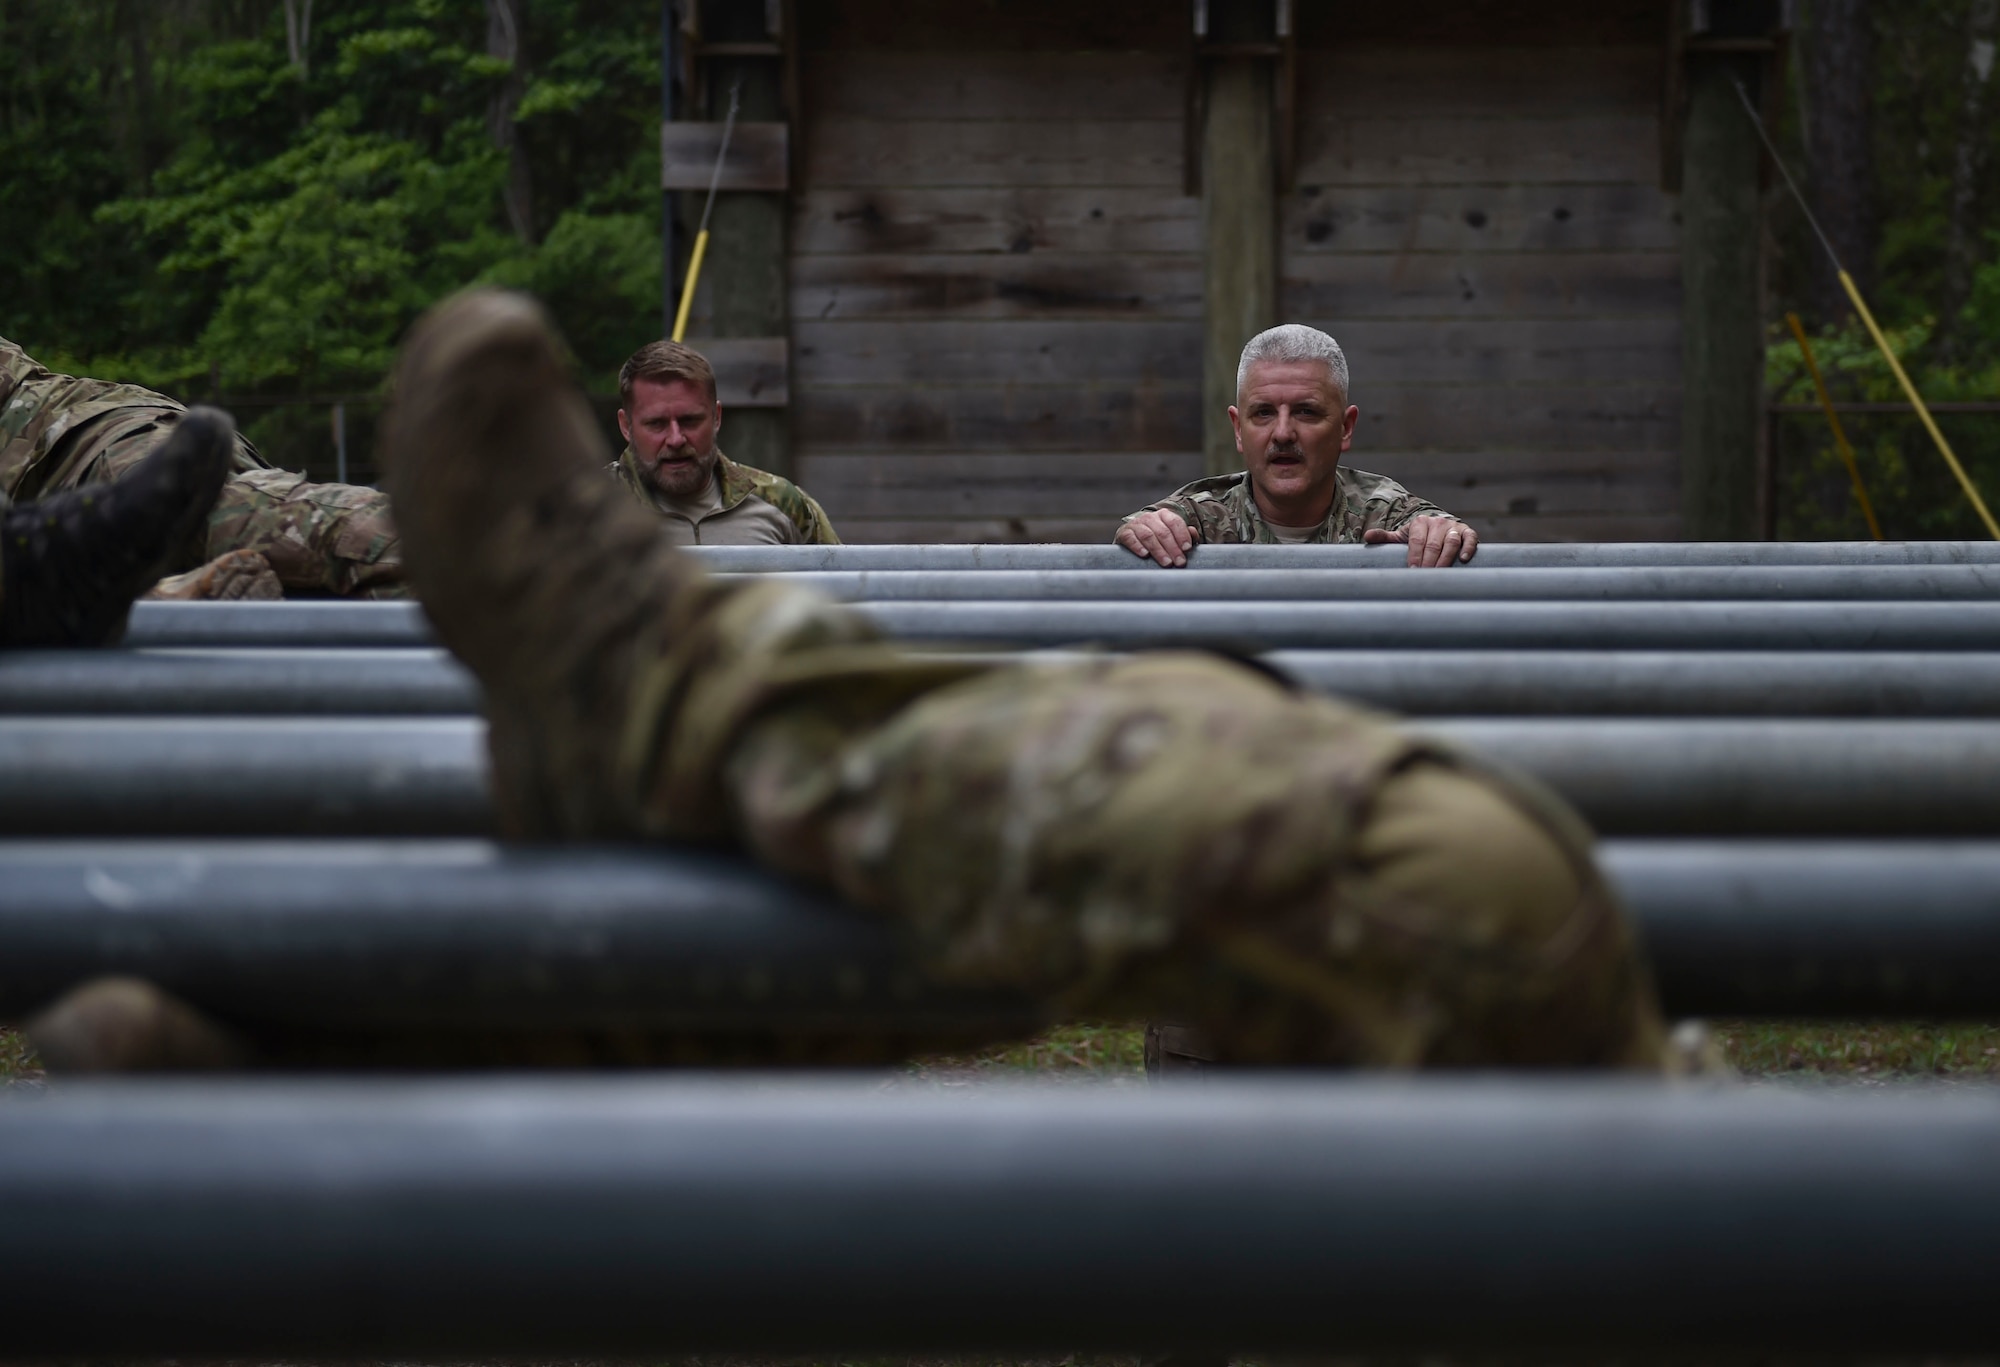 Chief Master Sgt. Bruce W. Dixon, the command chief master sergeant of the 24th Special Operations Wing, prepares to overcome an obstacle during a Monster Mash at Hurlburt Field, Fla., May 12, 2016. Monster Mash is a long-standing Special Tactics training tradition, consisting of an obstacle course where special operators complete timed scenarios at different stations of core mission training. The event was held in honor of Dixon, who is retiring after a 30-year career as a combat controller. (U.S. Air Force photo by Senior Airman Ryan Conroy) 